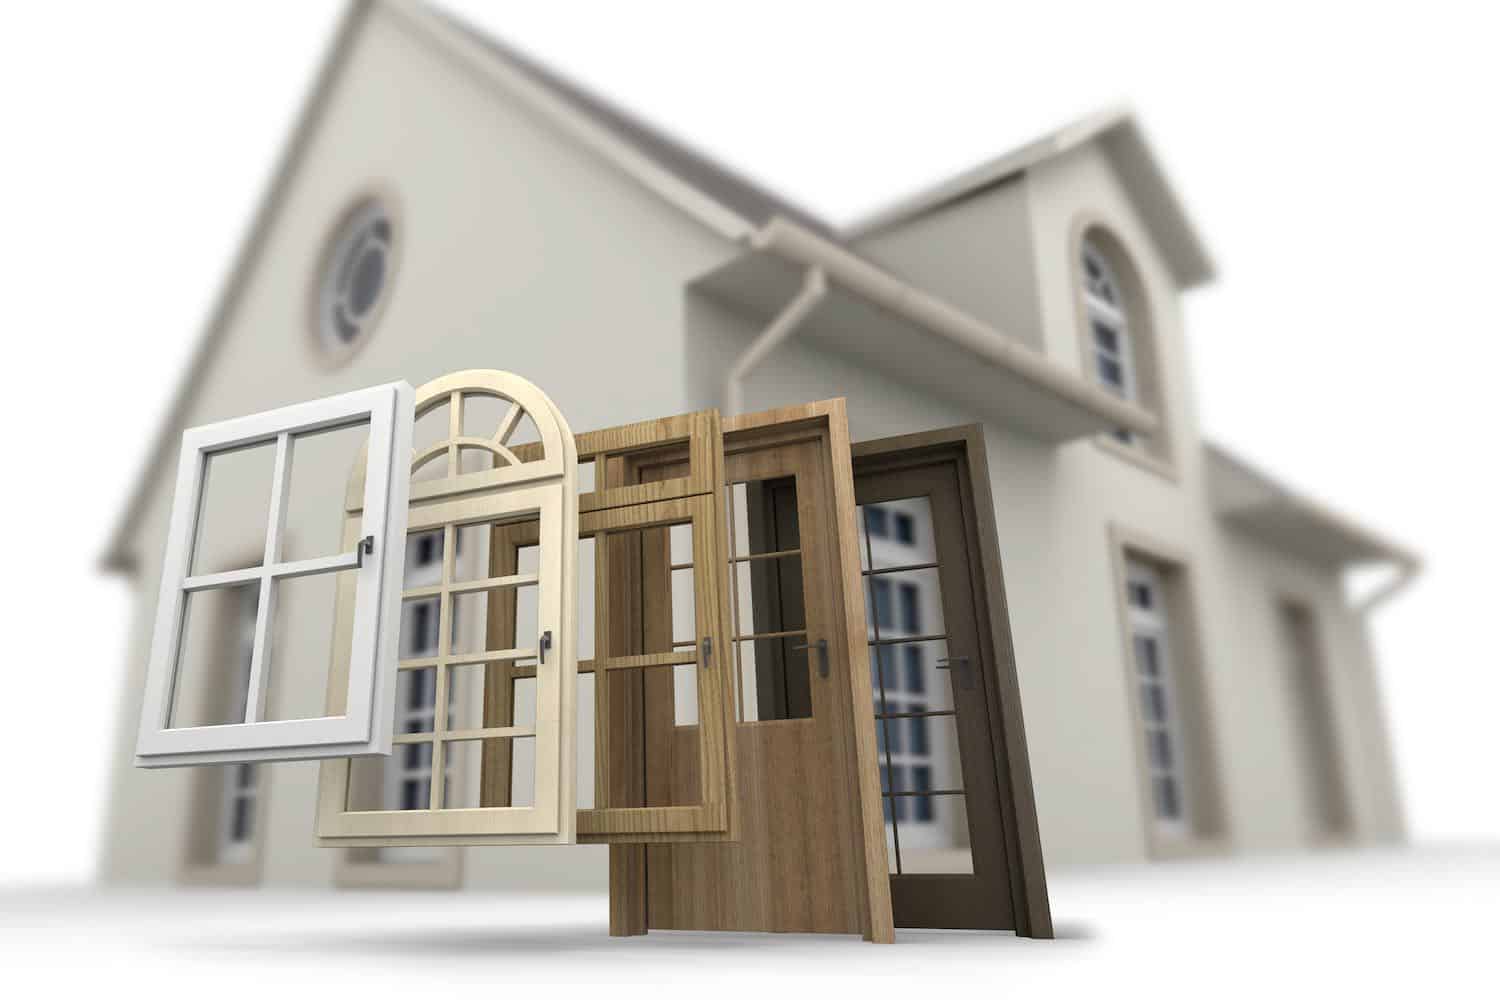 Choosing the perfect windows and doors for your home